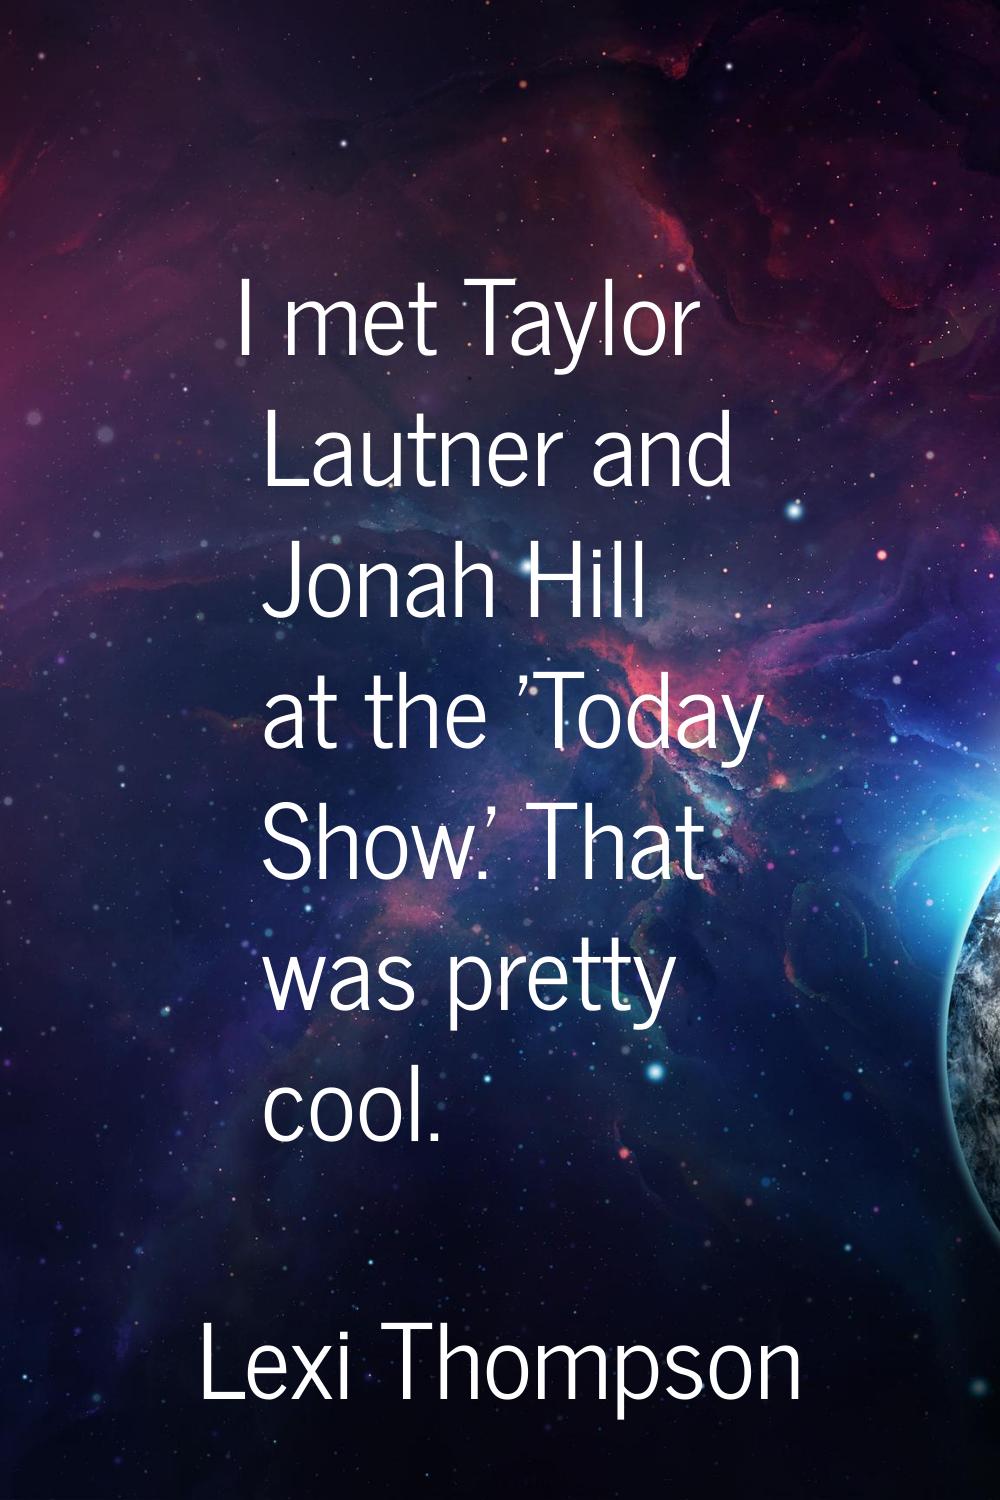 I met Taylor Lautner and Jonah Hill at the 'Today Show.' That was pretty cool.